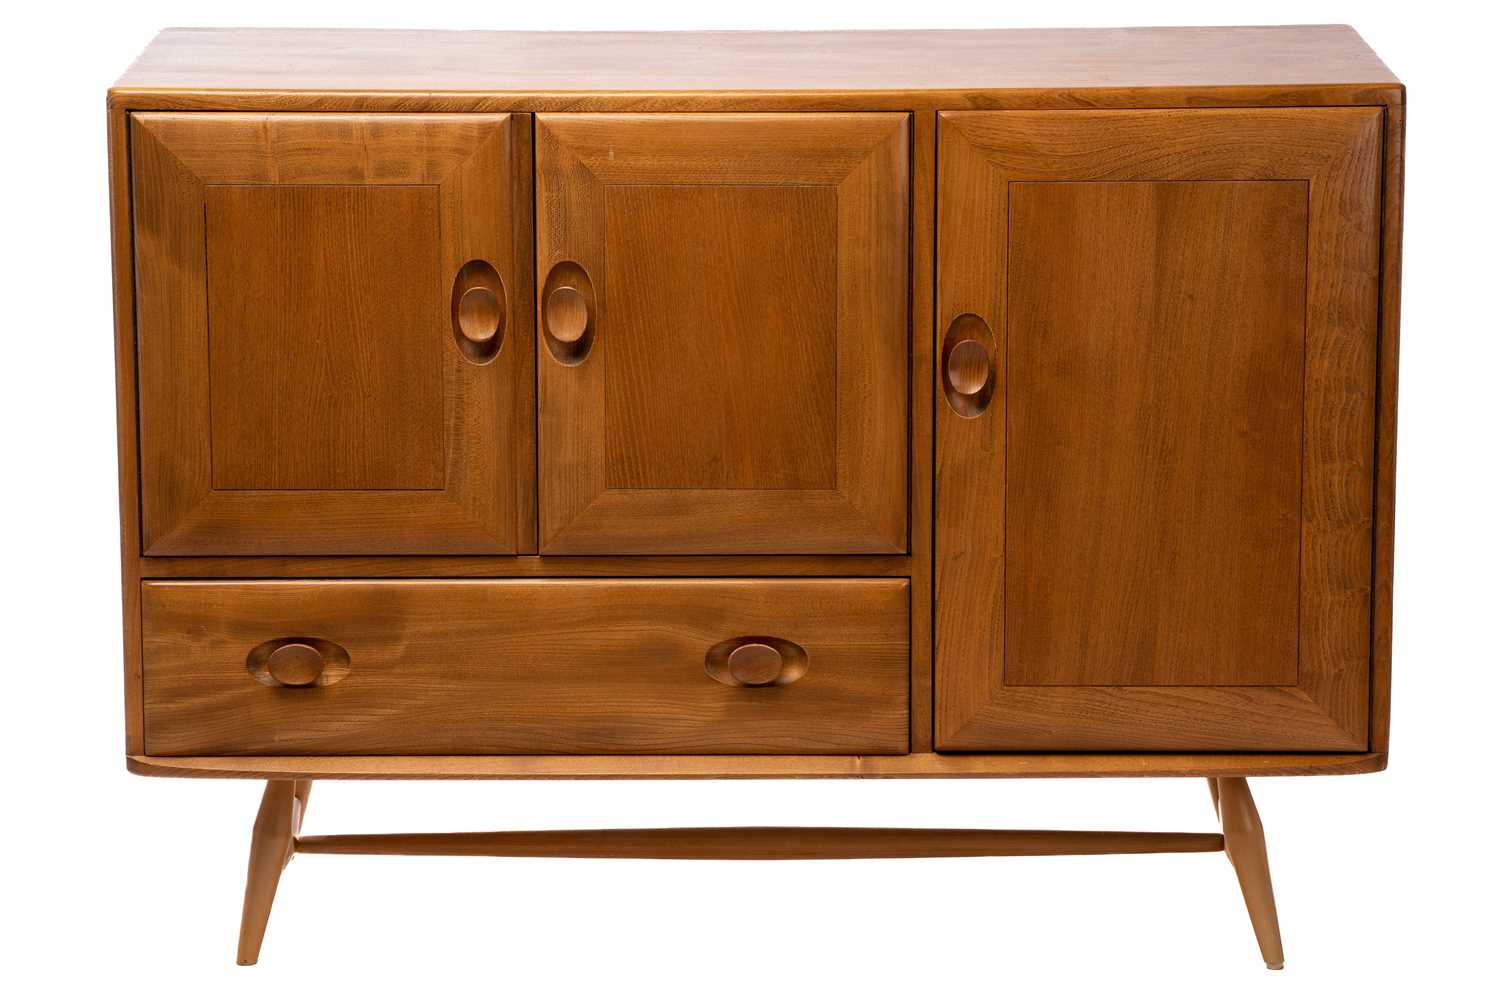 Ercol light ash and beech furniture comprising, a sideboard with a pair of cupboard doors over a - Image 2 of 39